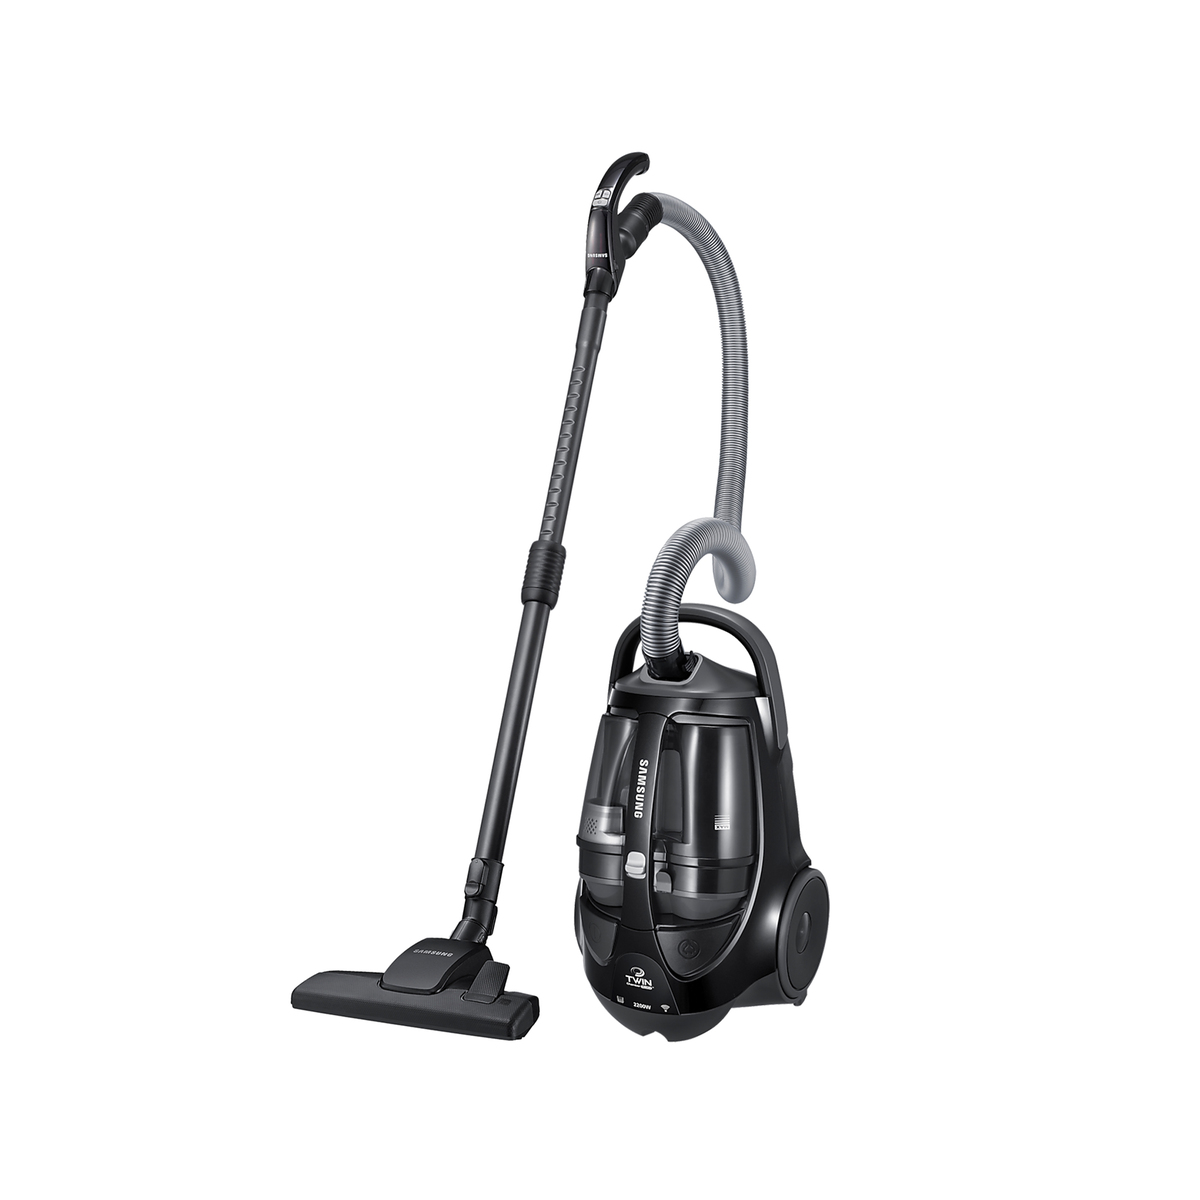 Samsung  Bagless Canister Vacuum Cleaner 2100W, Black, VCC8850H35/XSG